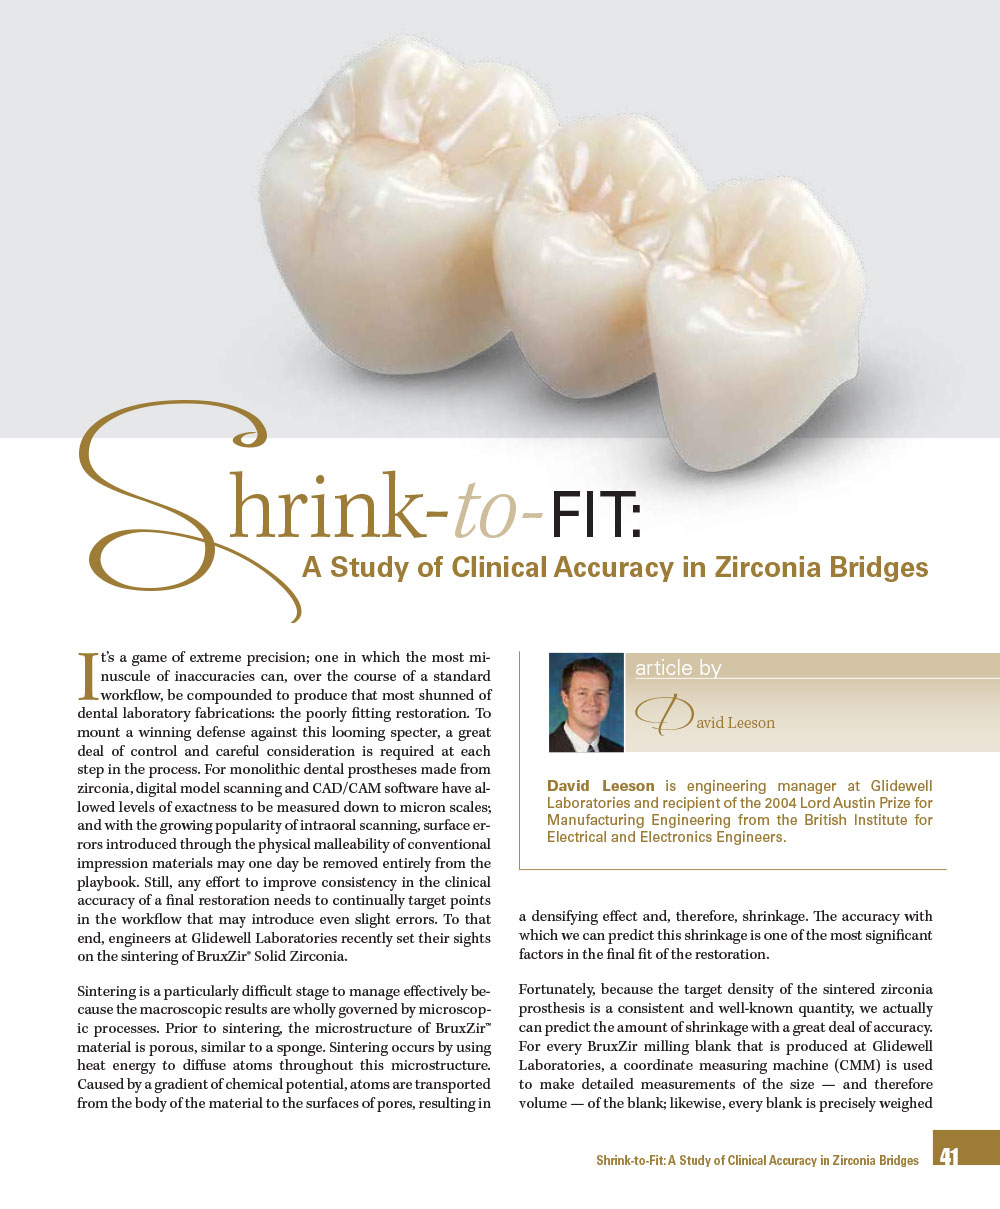 Shrink-to-Fit: A Study of Clinical Accuracy in Zirconia Bridges